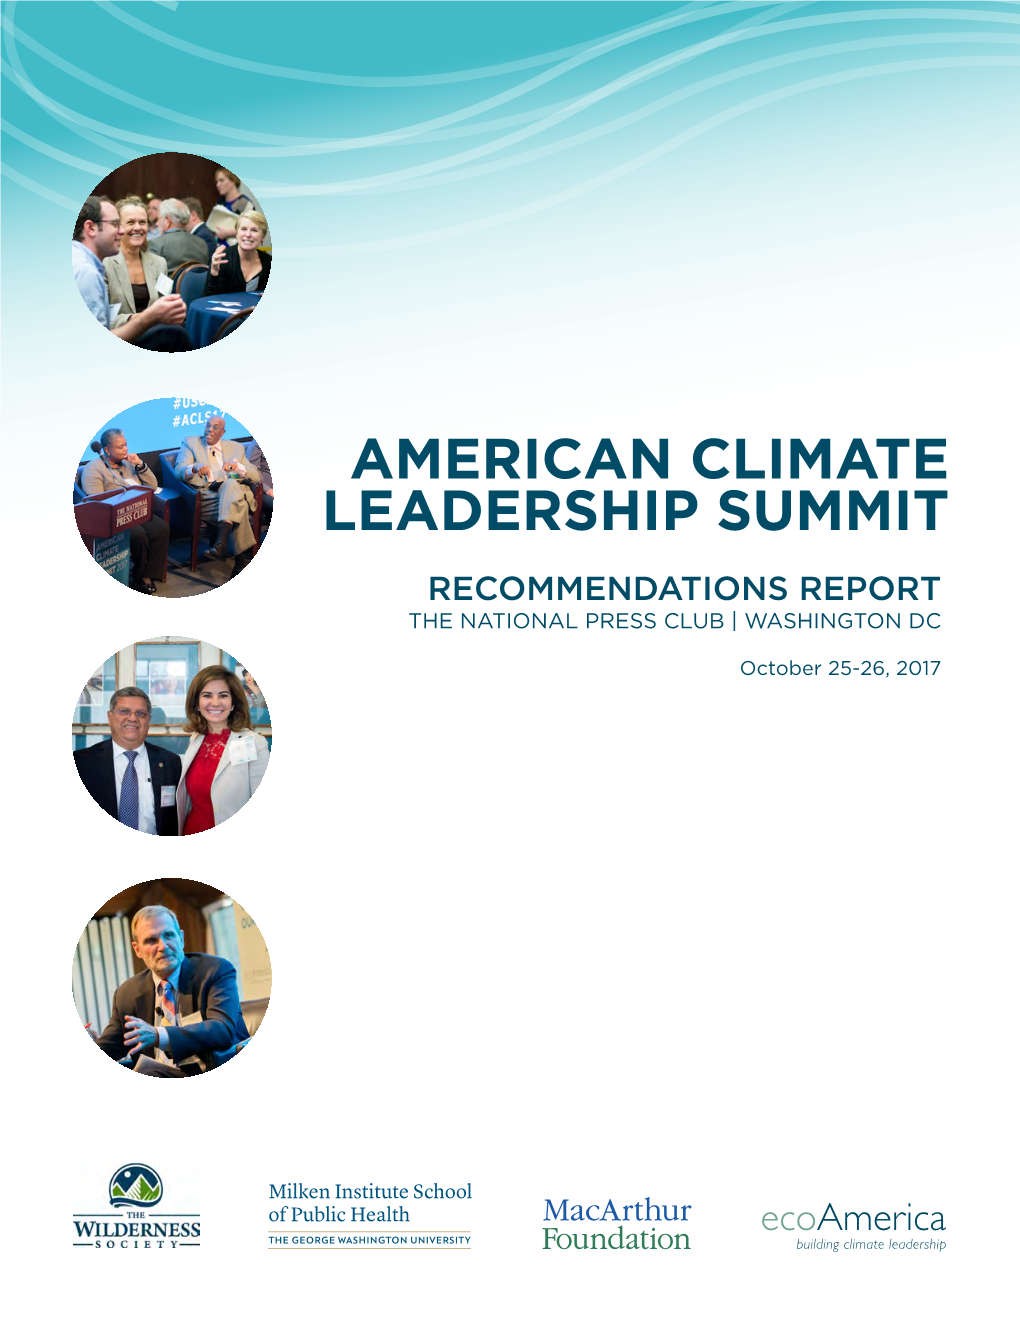 Recommendations Report from the 2017 American Climate Leadership